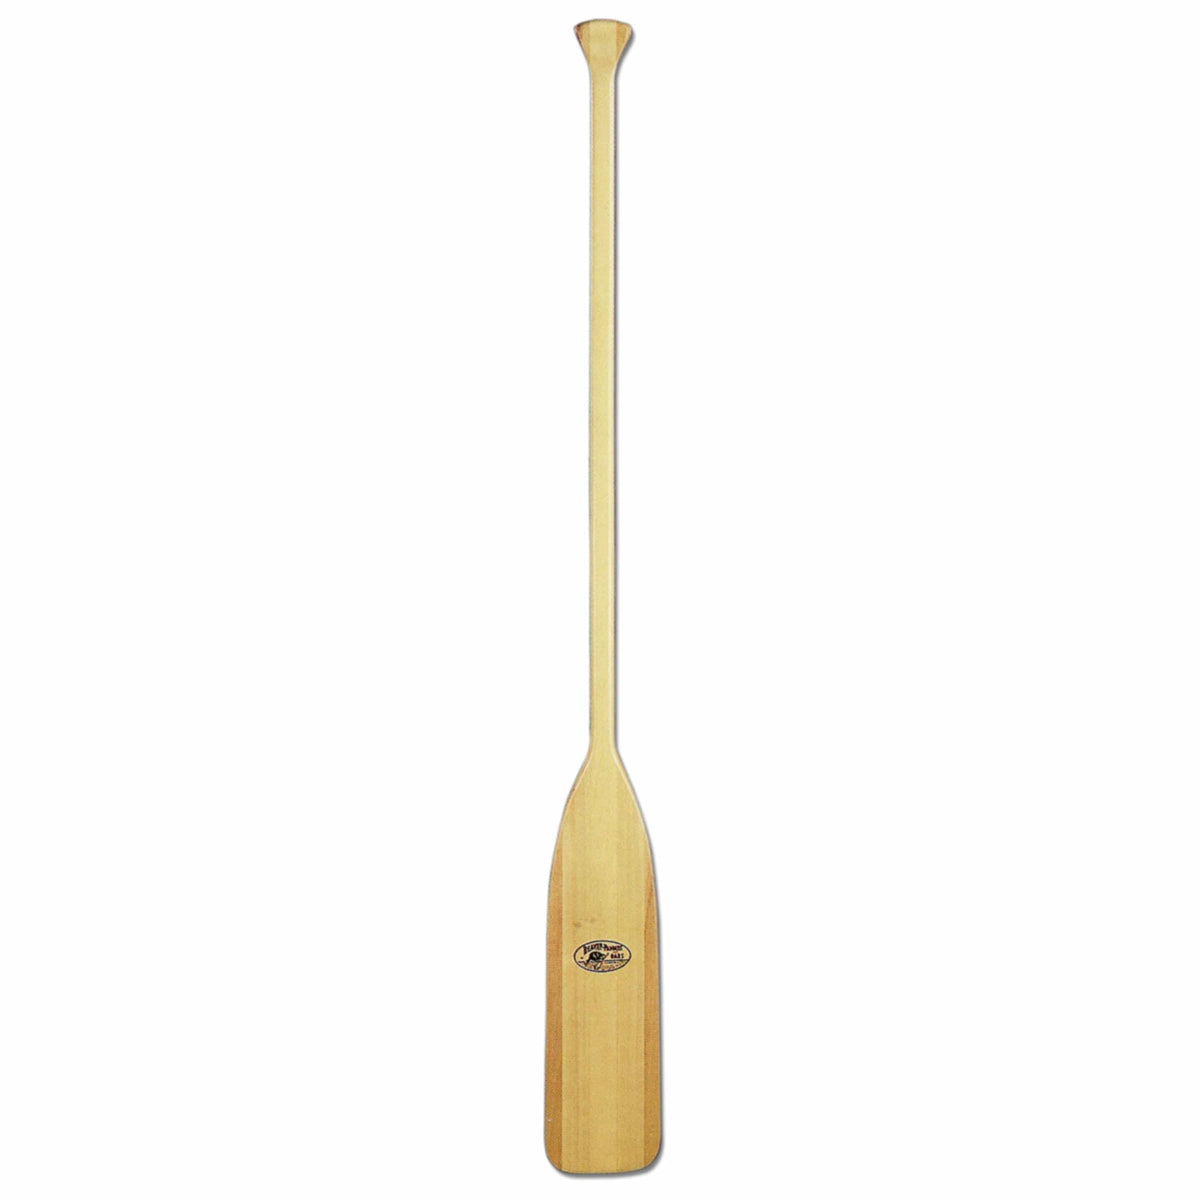 Caviness Woodworking Not Qualified for Free Shipping Caviness BP Series Varnished Wooden Paddle 6' #BP60